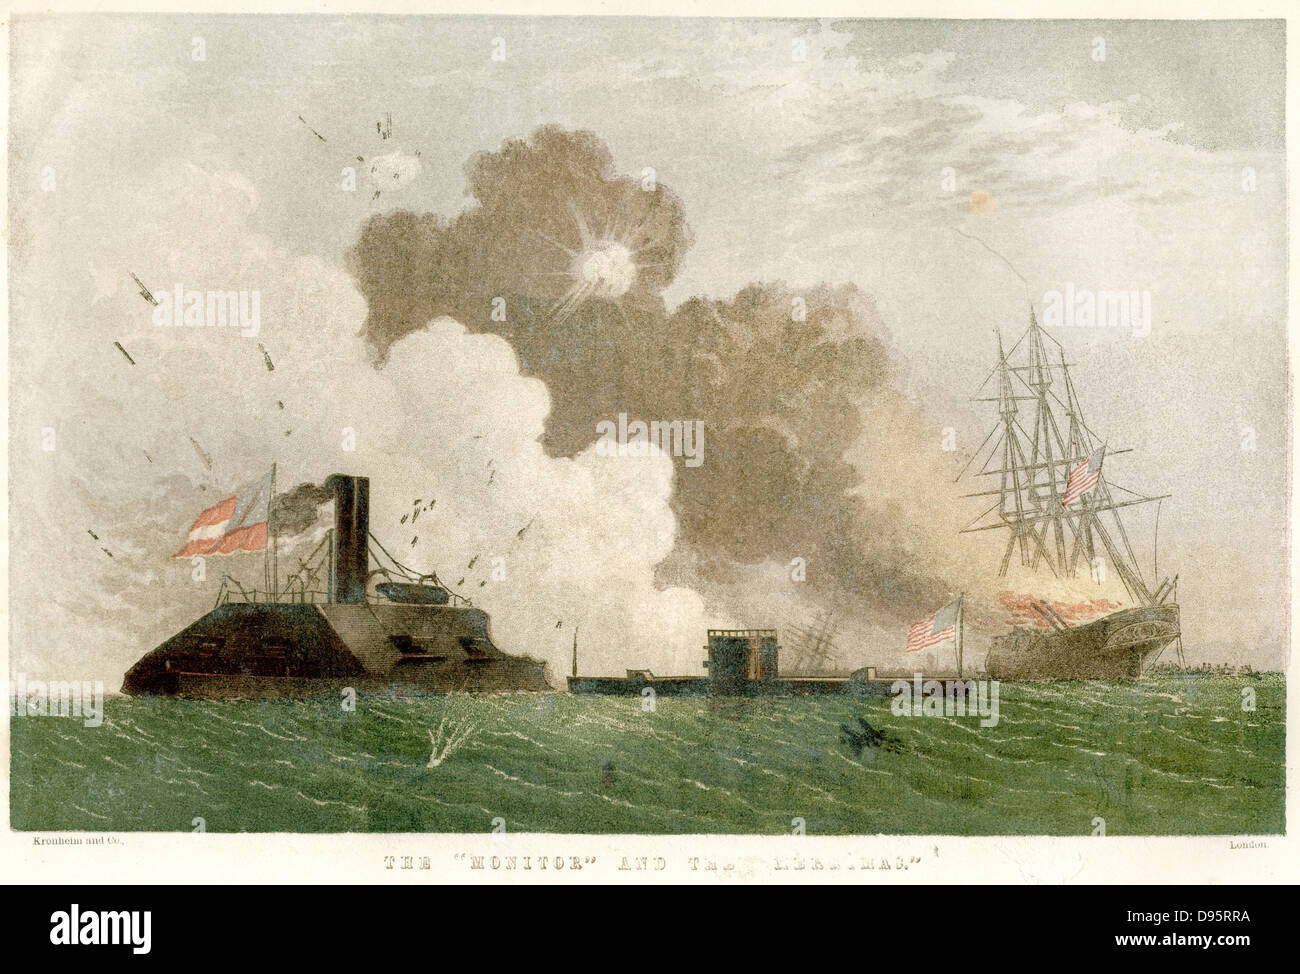 American Civil War: Engagement between Confederate ironclad 'Merrimac' and Union ironclad 'Monitor' - 8 March 1852. Chromolithograph published 1864 Stock Photo